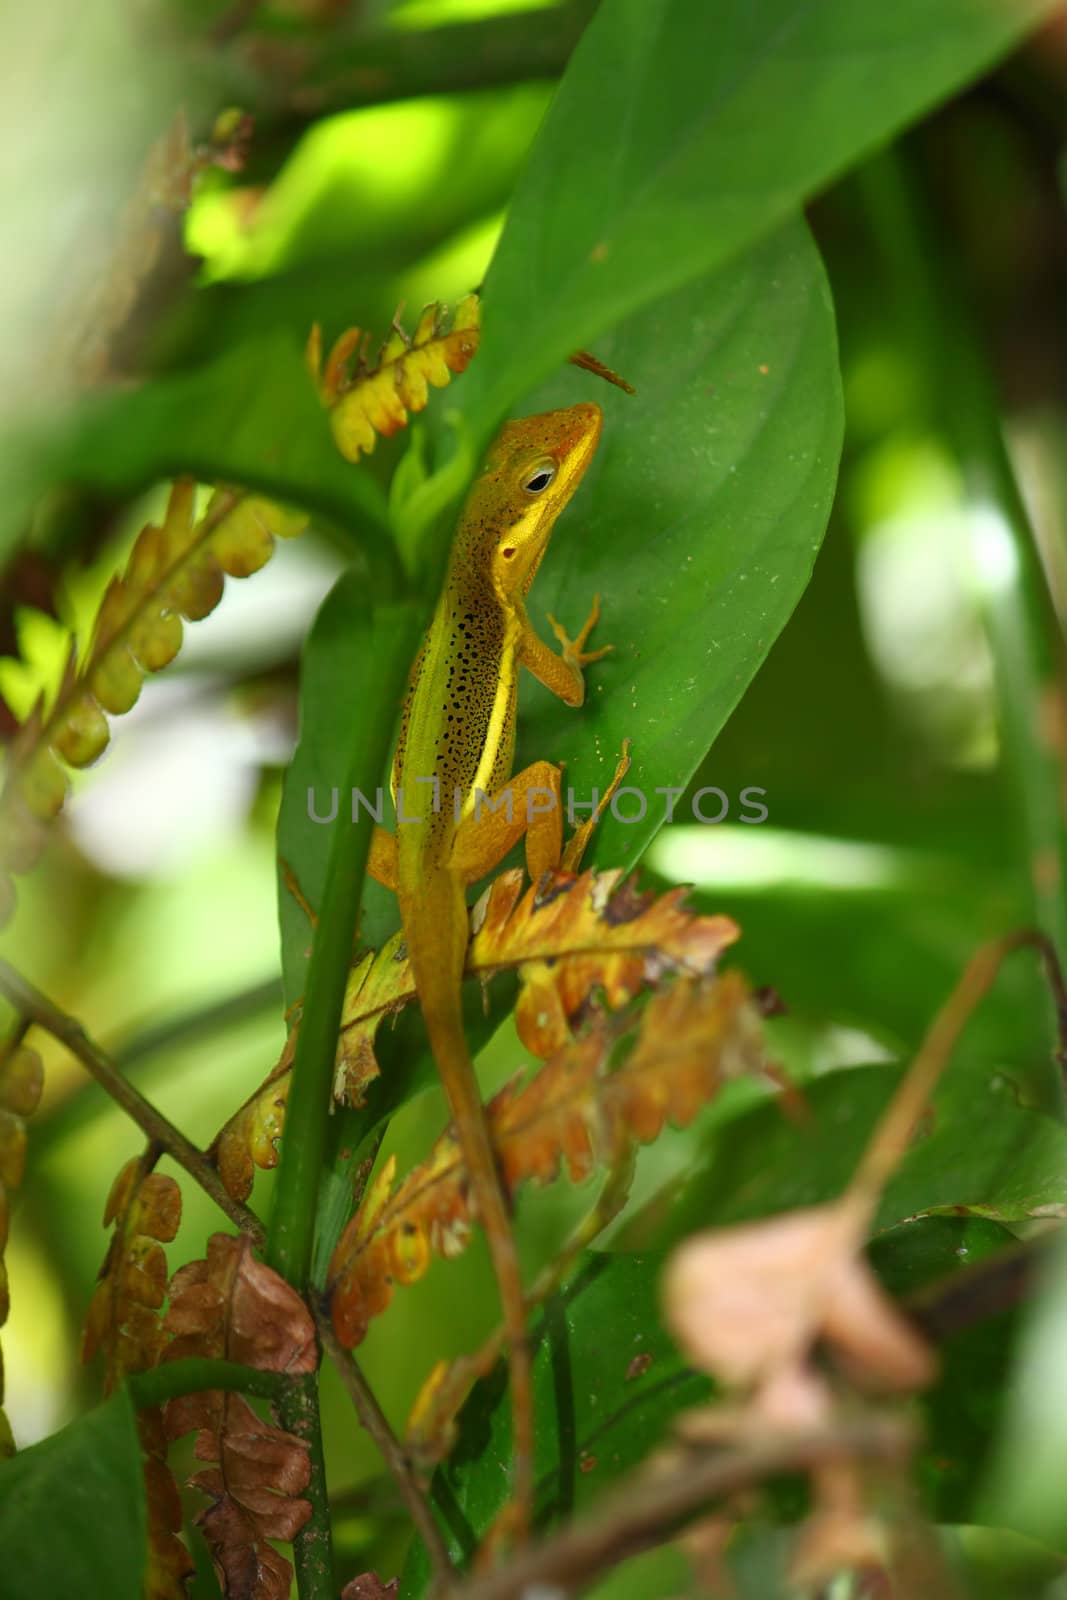 An Upland Grass Anole (Anolis krugi) hides amongst vegetation in  the El Yunque Rainforest of Puerto Rico.